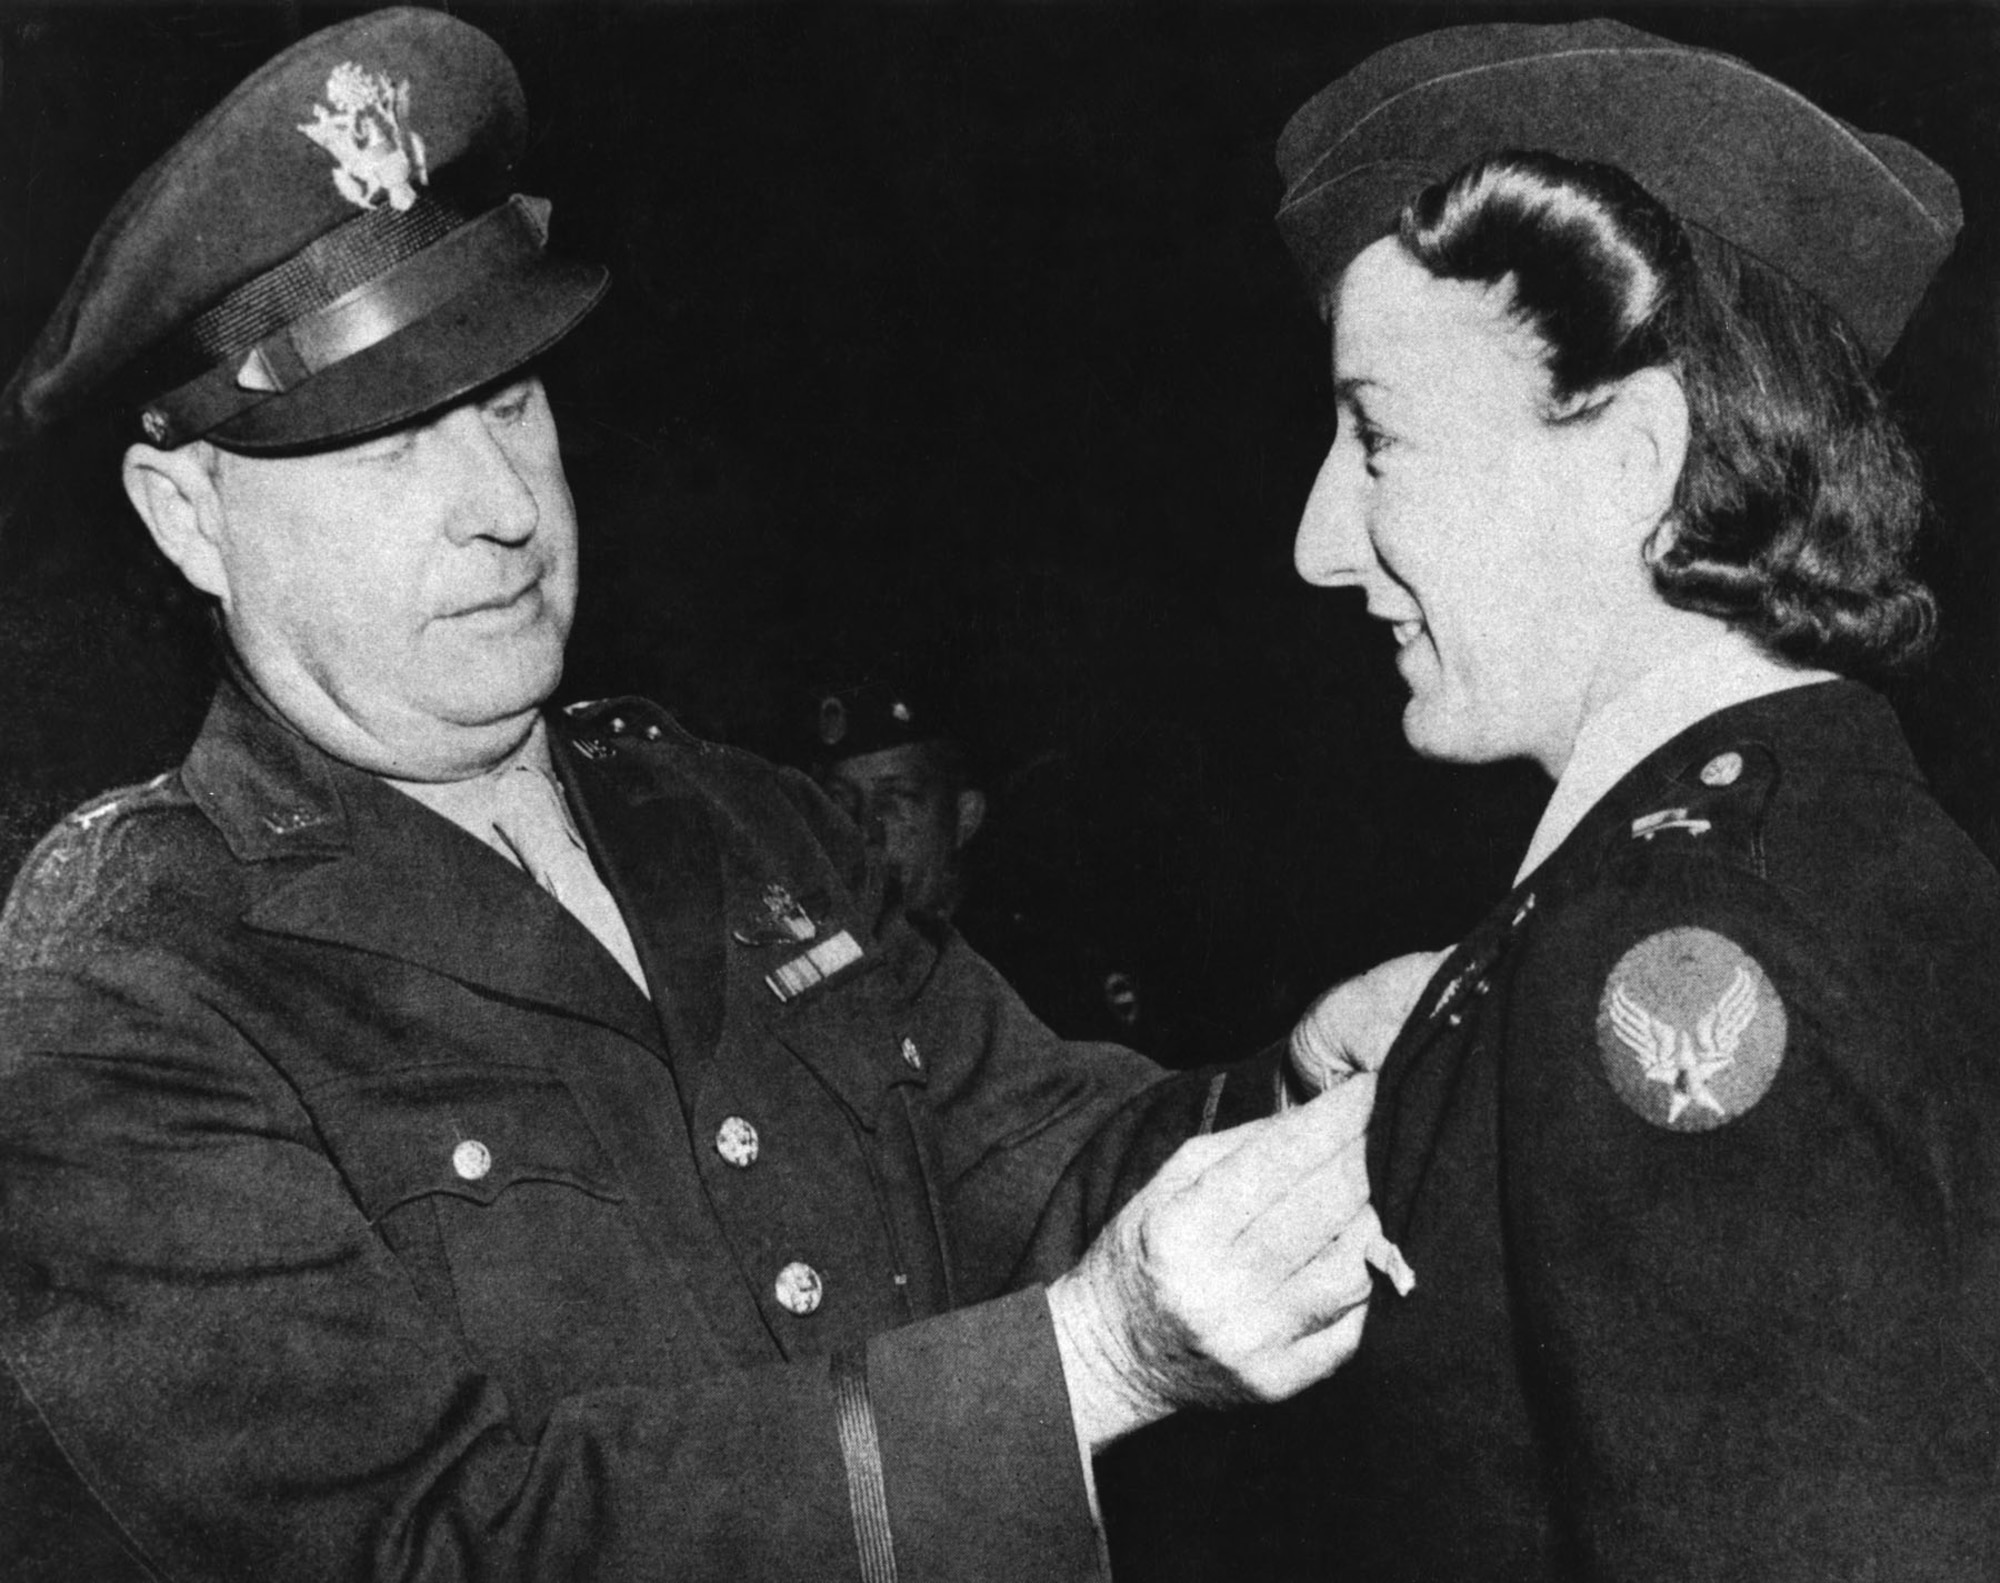 Brig. Gen. Fred W. Borum presents the Air Medal to Lt. Elsie Ott, who was the first woman to receive the Air Medal. (U.S. Air Force photo)